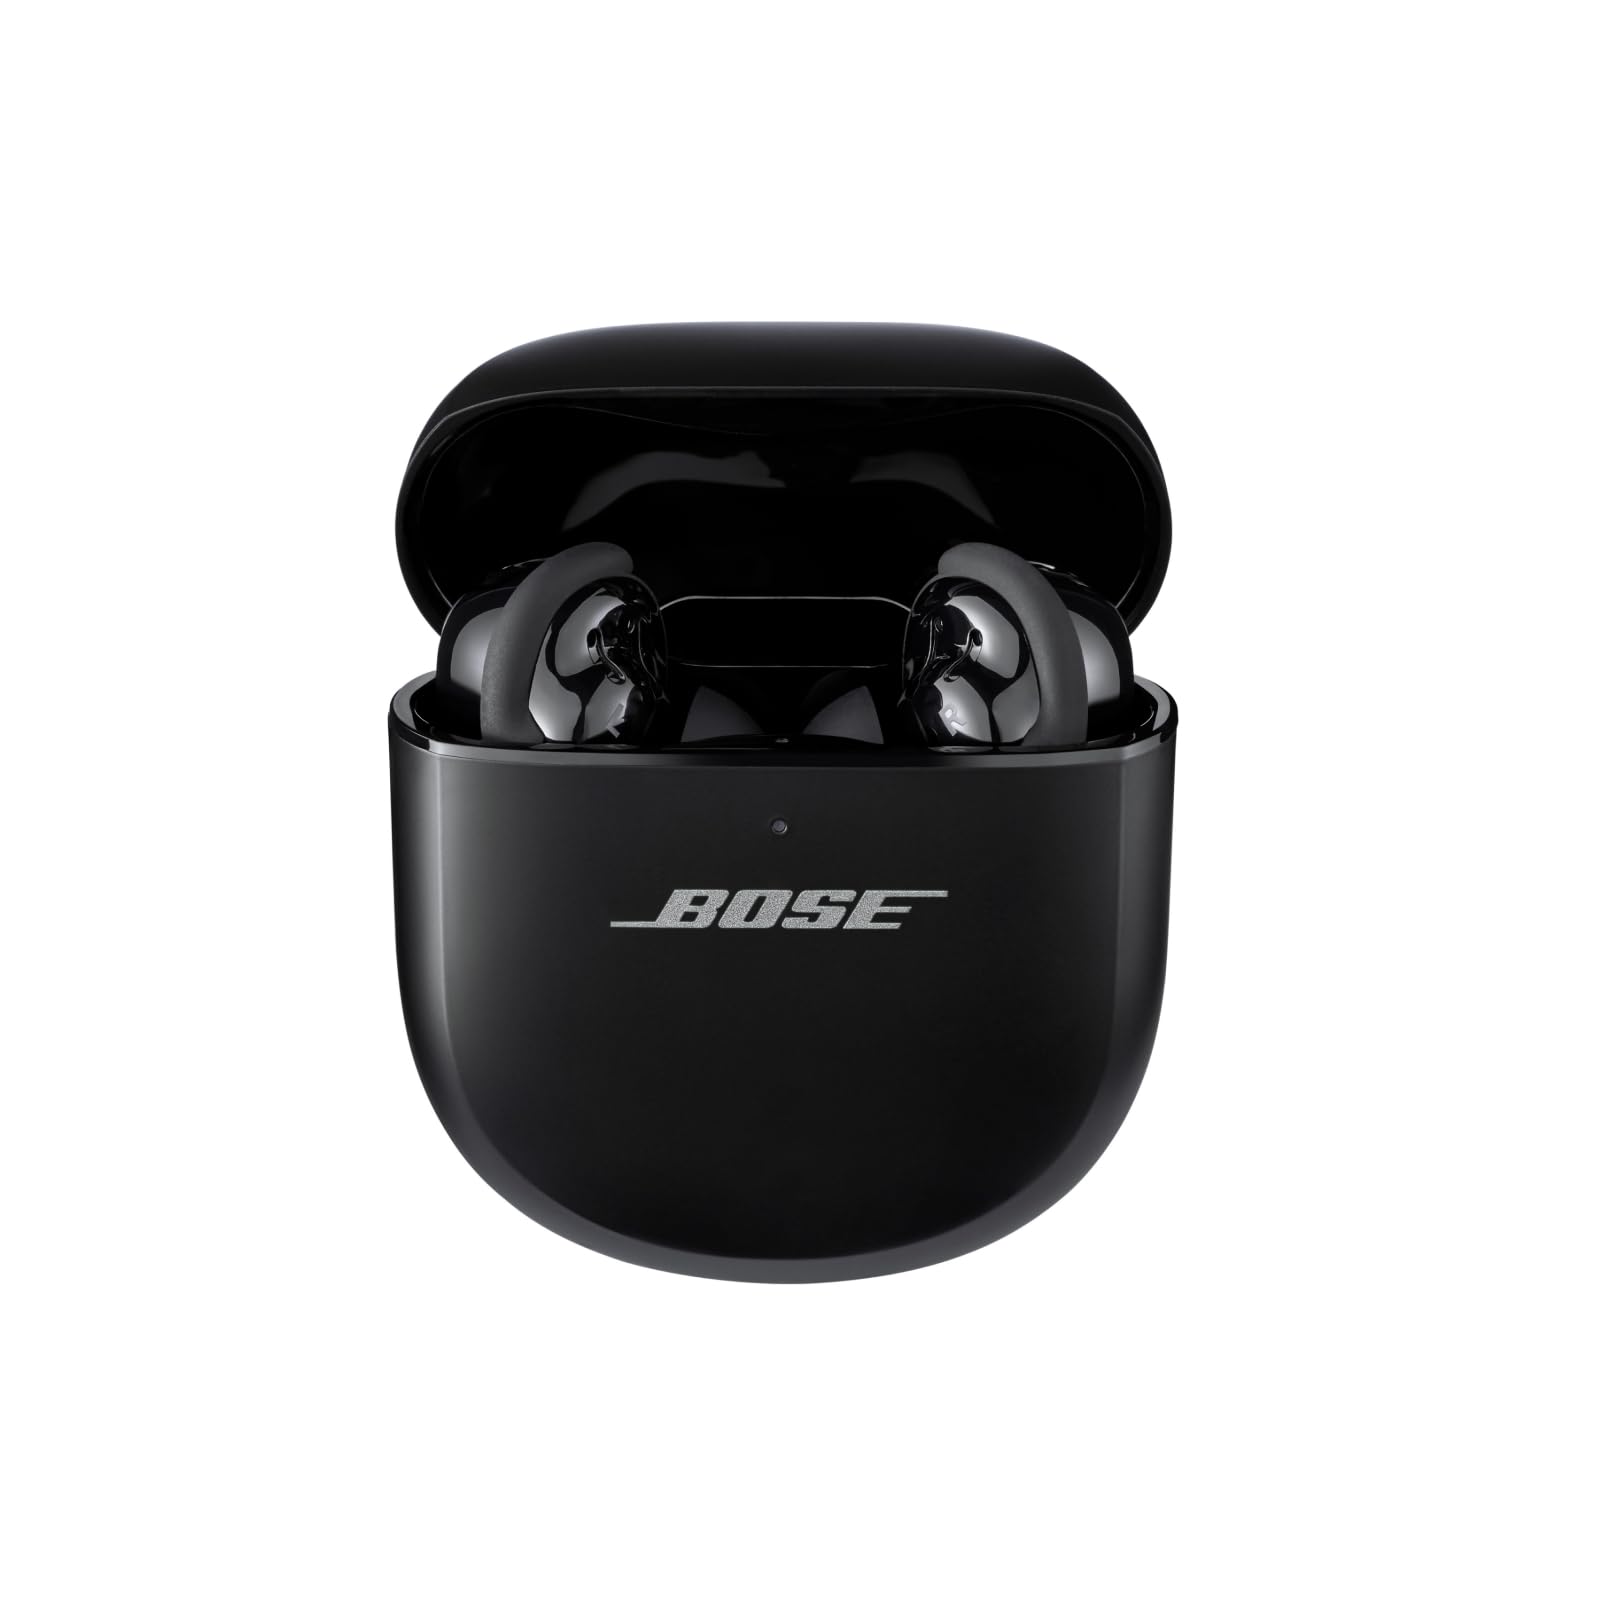 New Bose QuietComfort Ultra Wireless Noise Cancelling Earbuds, Bluetooth Noise Cancelling Earbuds with Spatial Audio and World-Class Noise Cancellation, Black